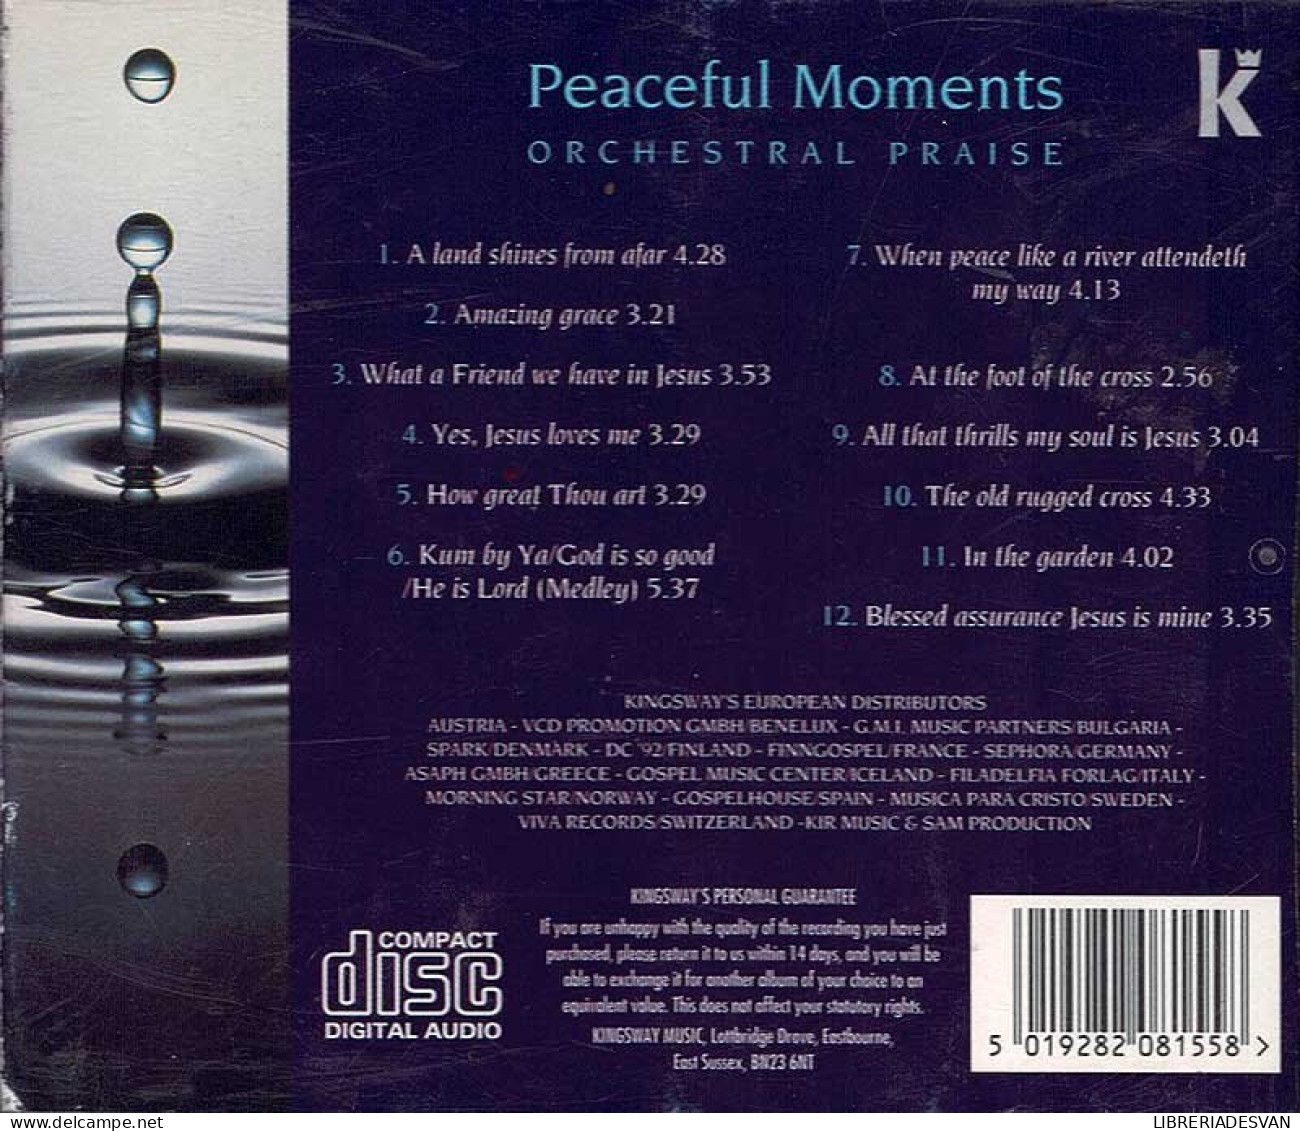 Orchestral Praise - Peaceful Moments. CD - New Age